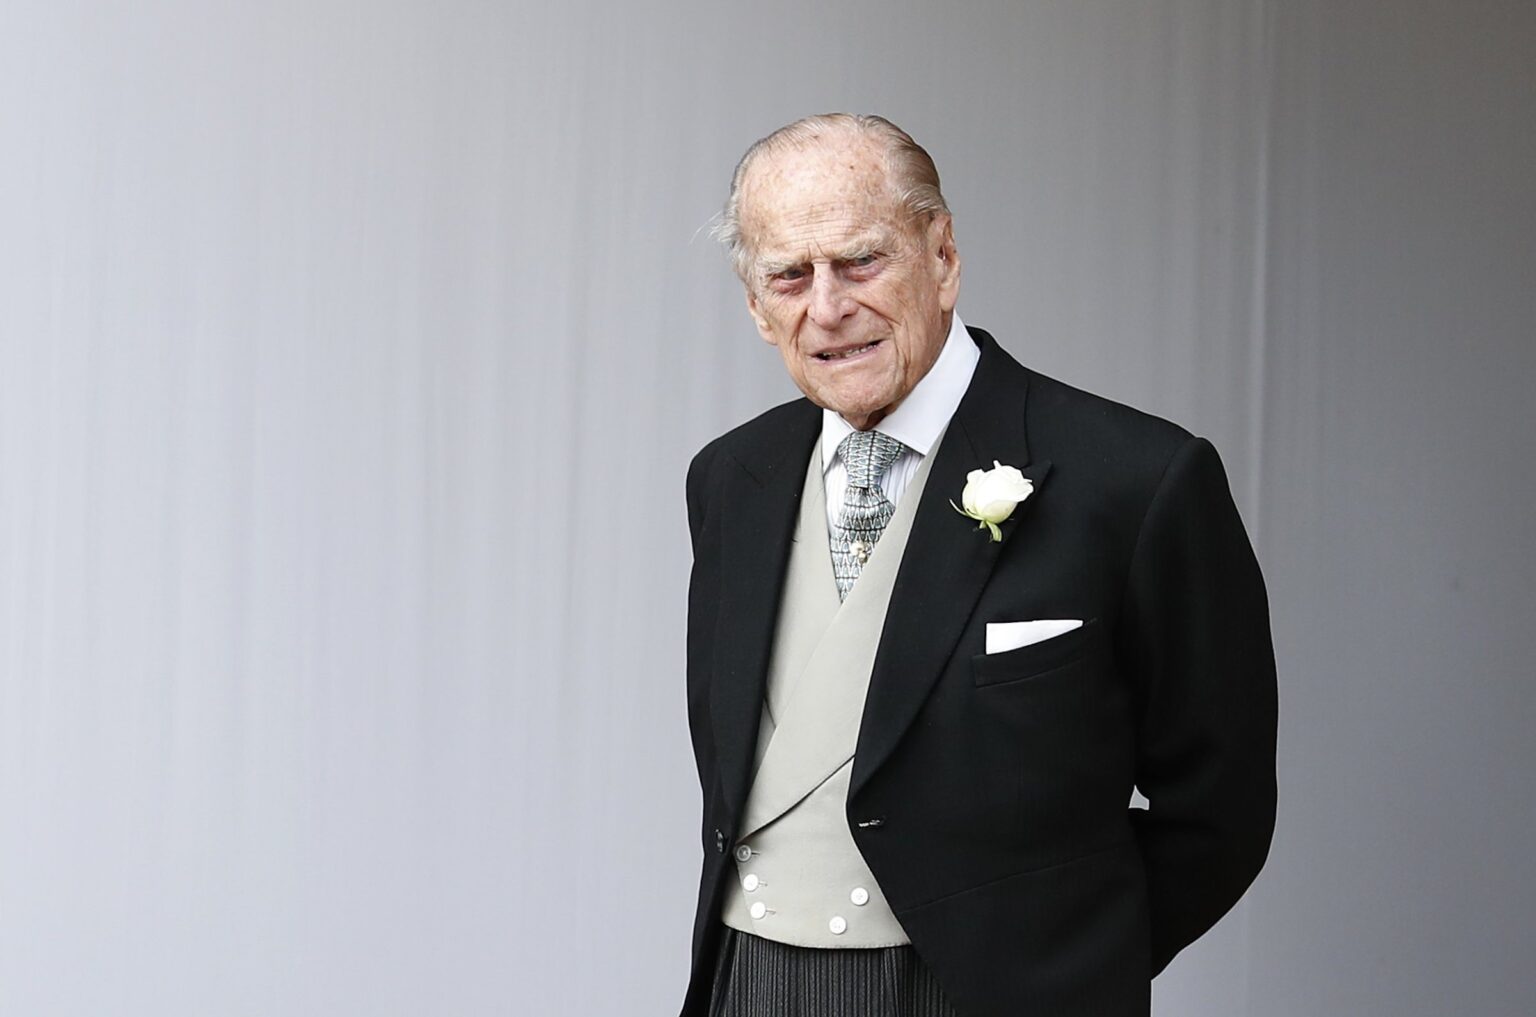 Prince Philip is in the hospital again with health issues. Find out if he'll be able to see his 100th birthday .